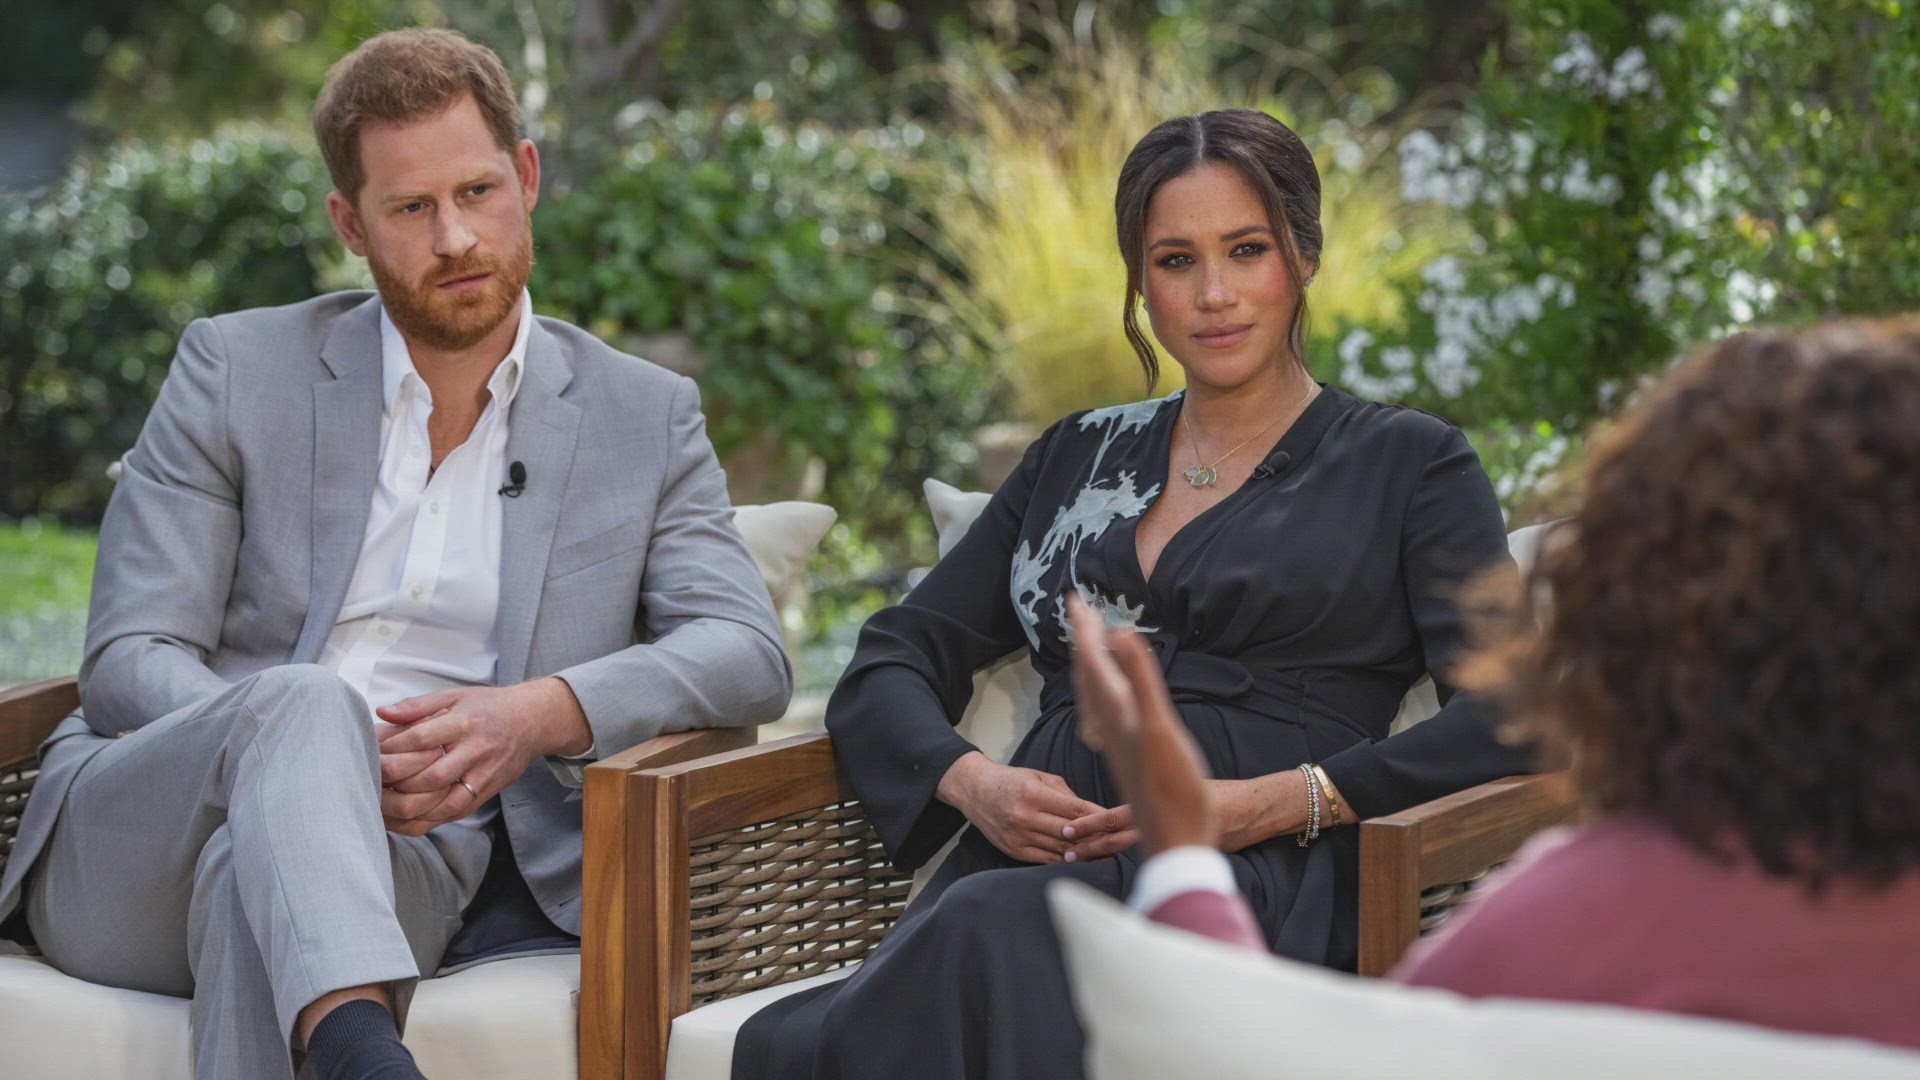 The plot thickens after Meghan Markle and Prince Harry's explosive interview with Oprah led to the exit of Piers Morgan from ITV's Good Morning Britain. Veuer's Maria Mercedes Galuppo has the story.